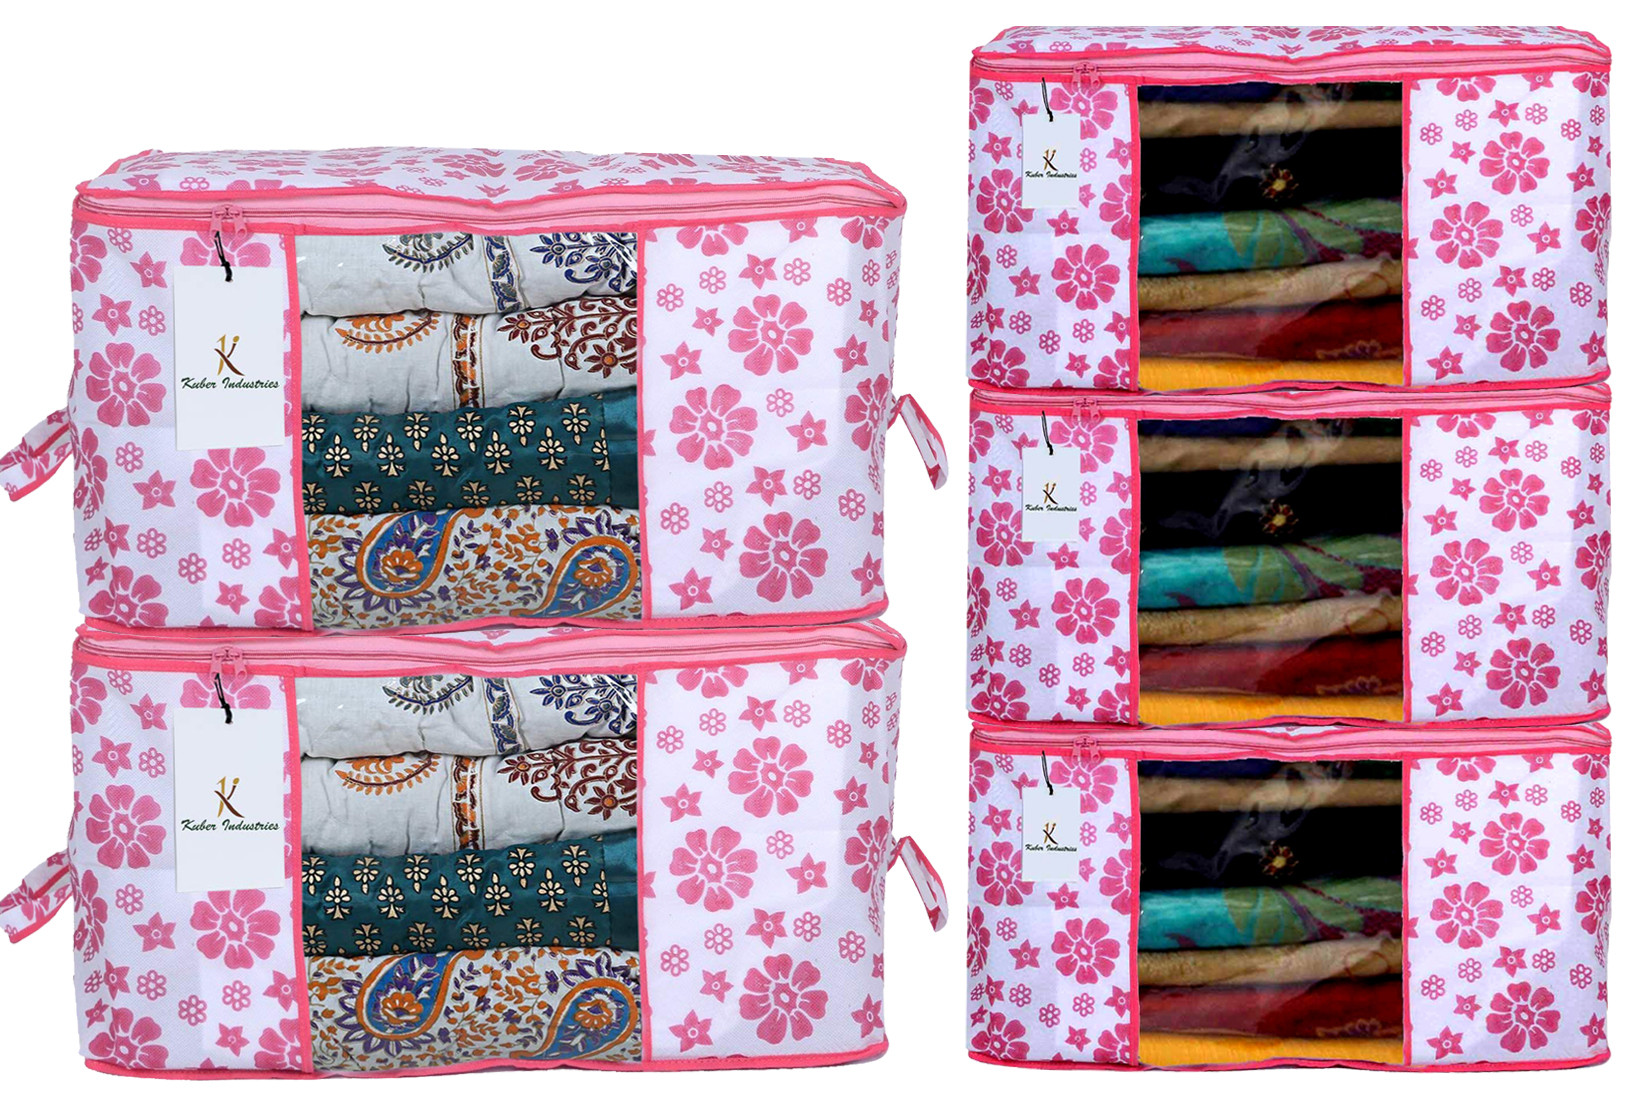 Kuber Industries Flower Printed Non Woven Saree Cover And Underbed Storage Bag, Cloth Organizer For Storage, Blanket Cover Combo Set (Pink) -CTKTC38607